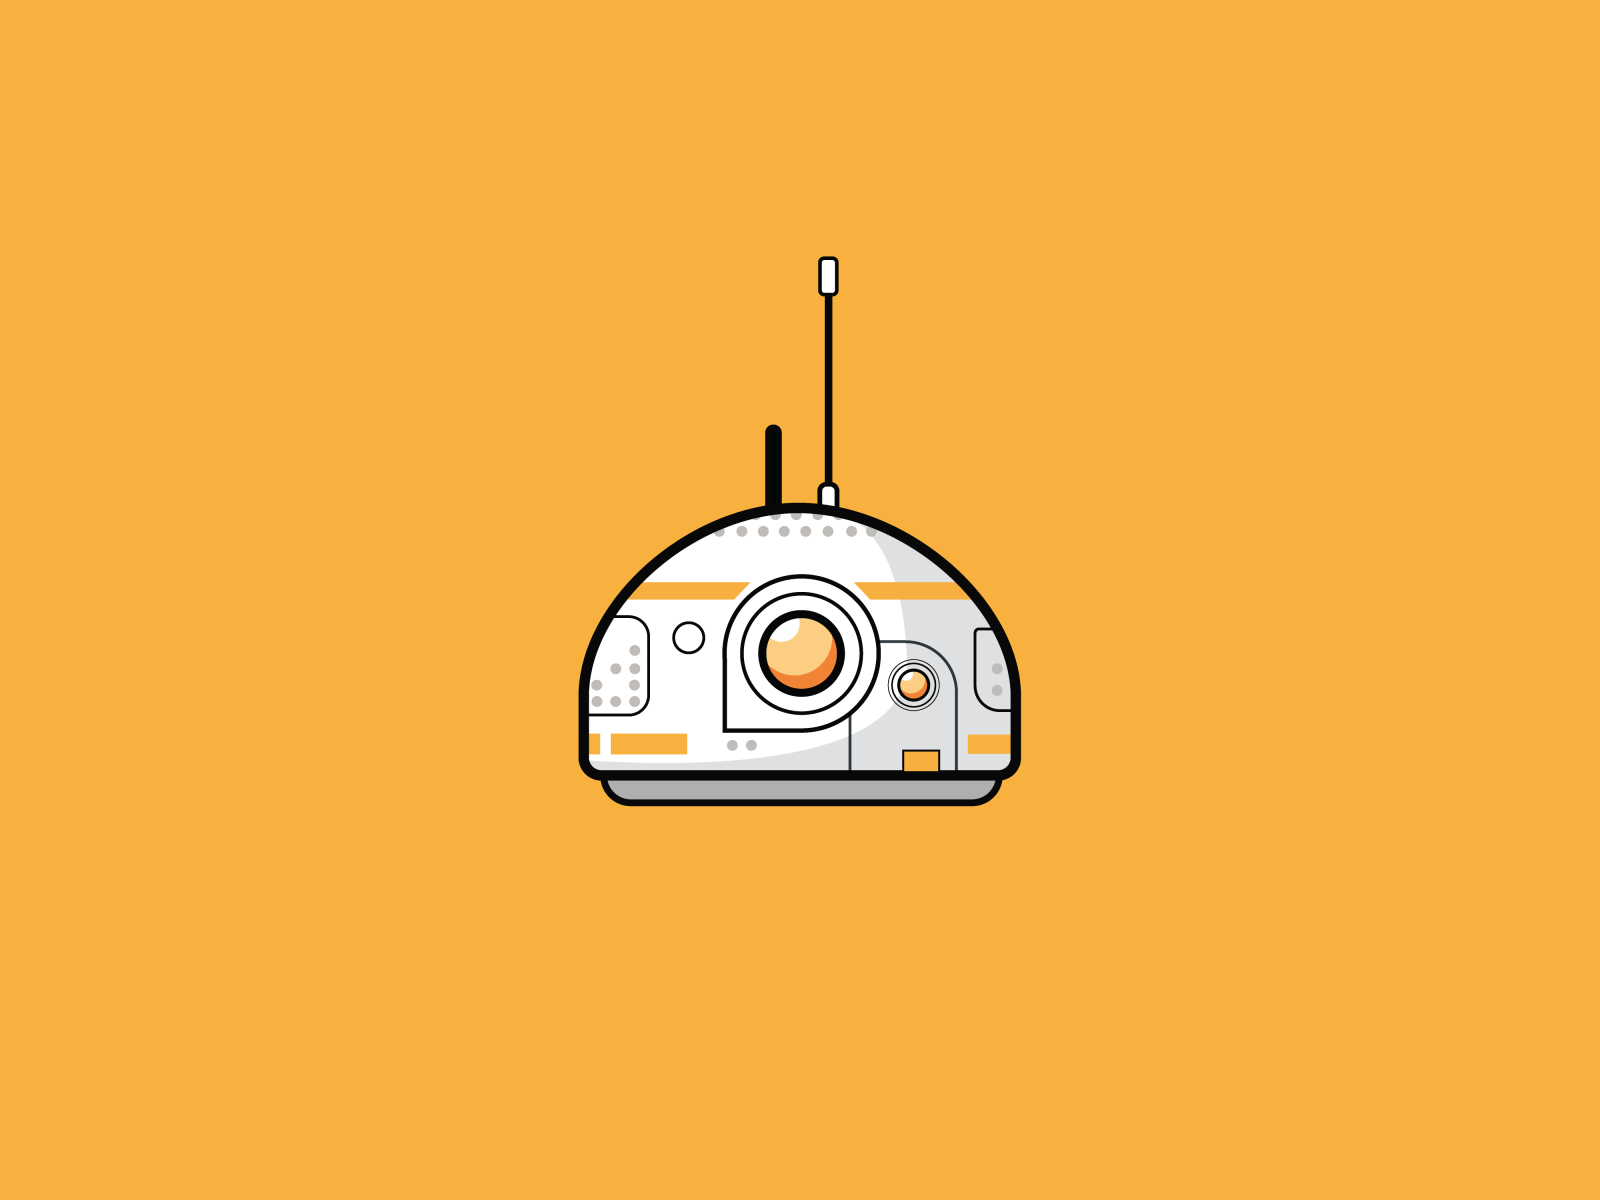 Bb8 Star Wars By Wirral Graphic Designer On Dribbble